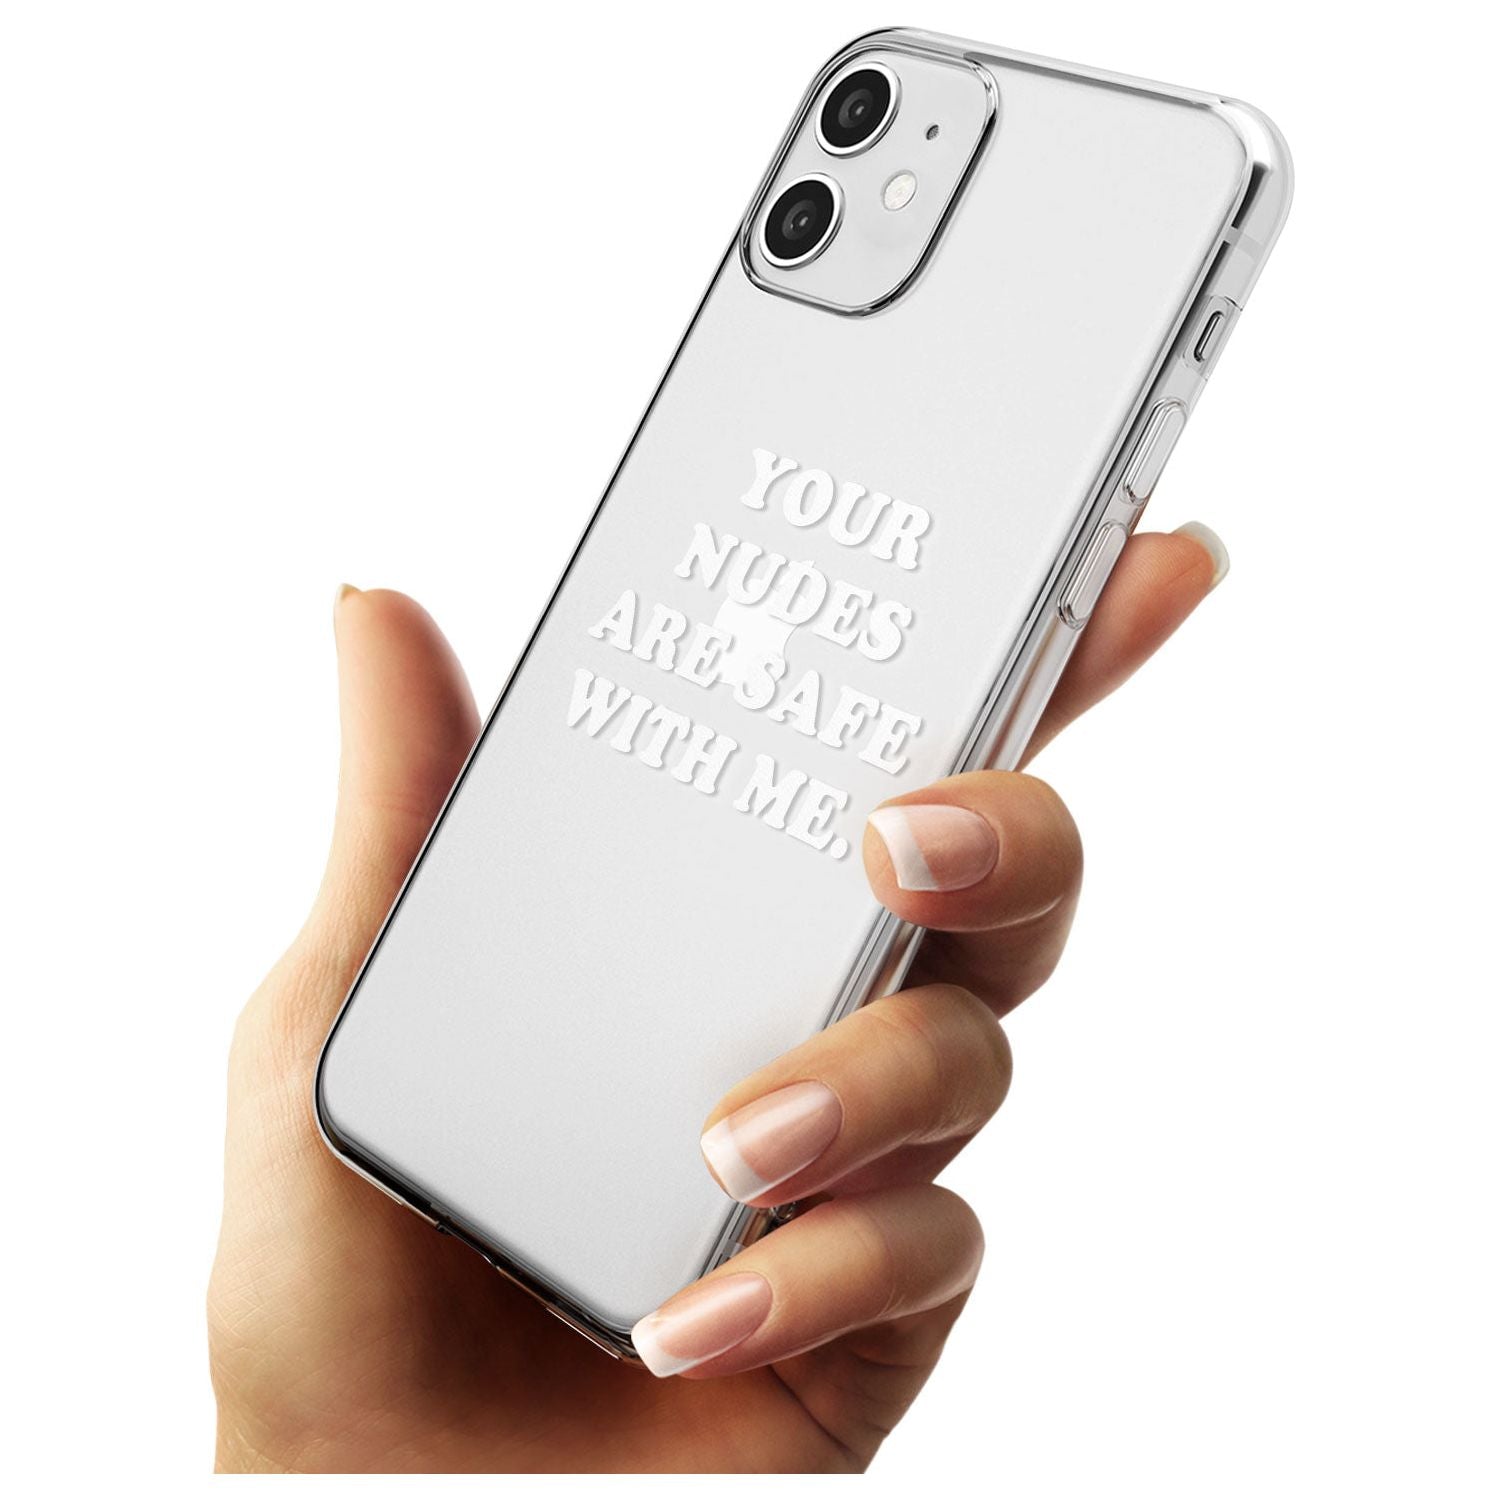 Your nudes are safe with me... WHITE Slim TPU Phone Case for iPhone 11